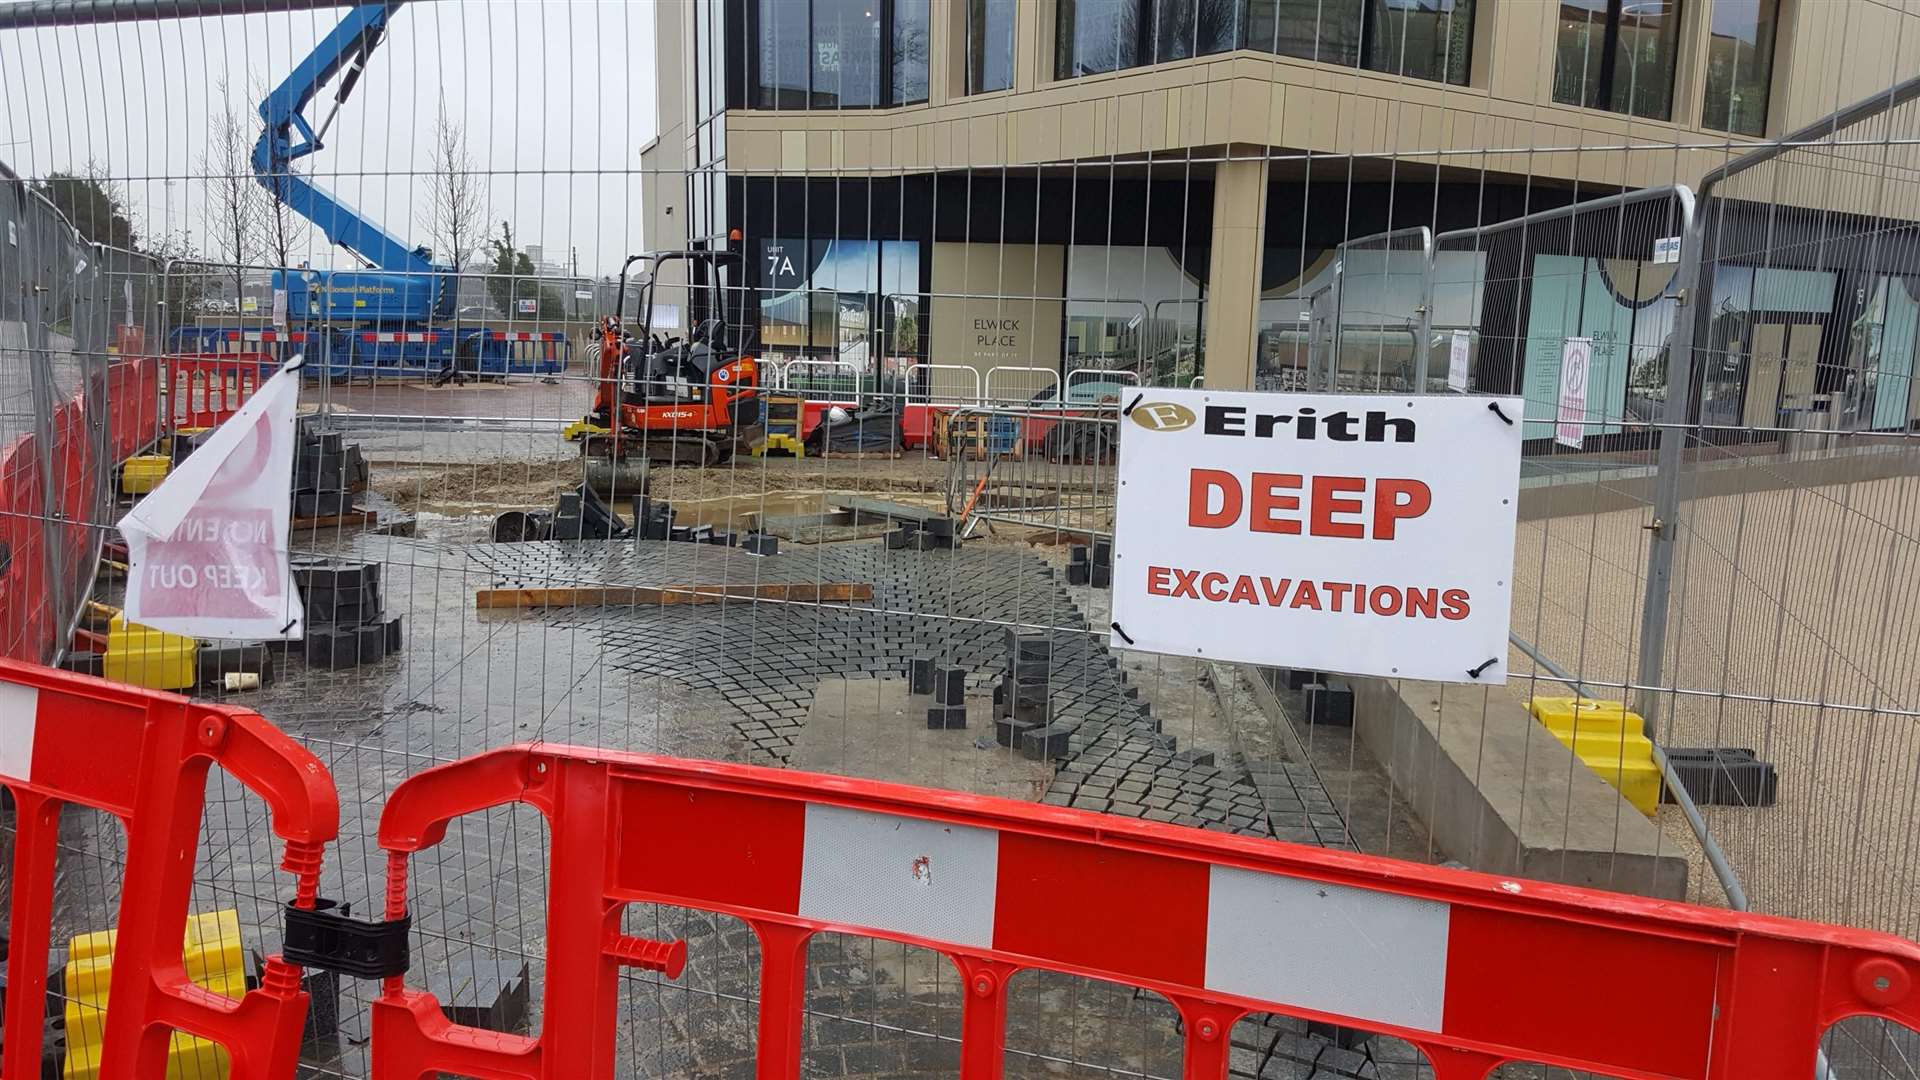 Work to install a new pavement is underway outside the cinema